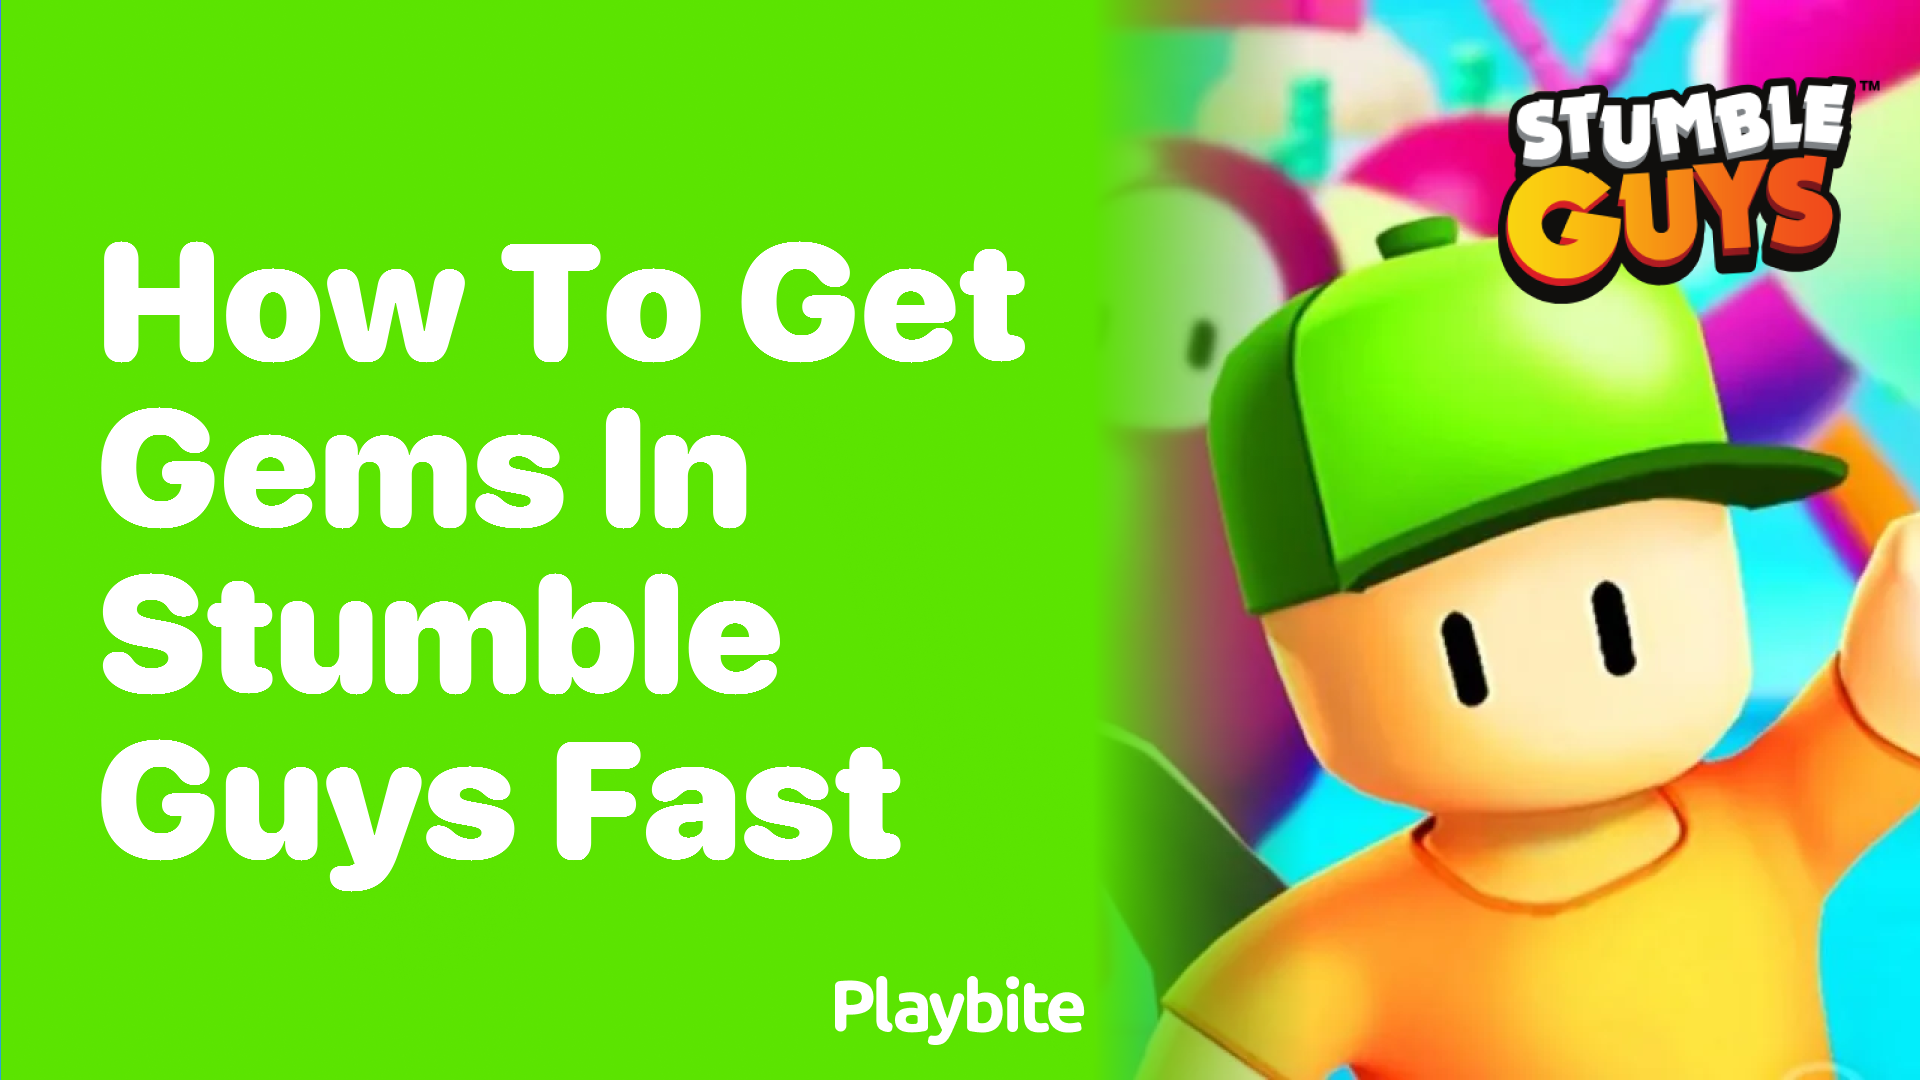 How to Get Gems in Stumble Guys Fast